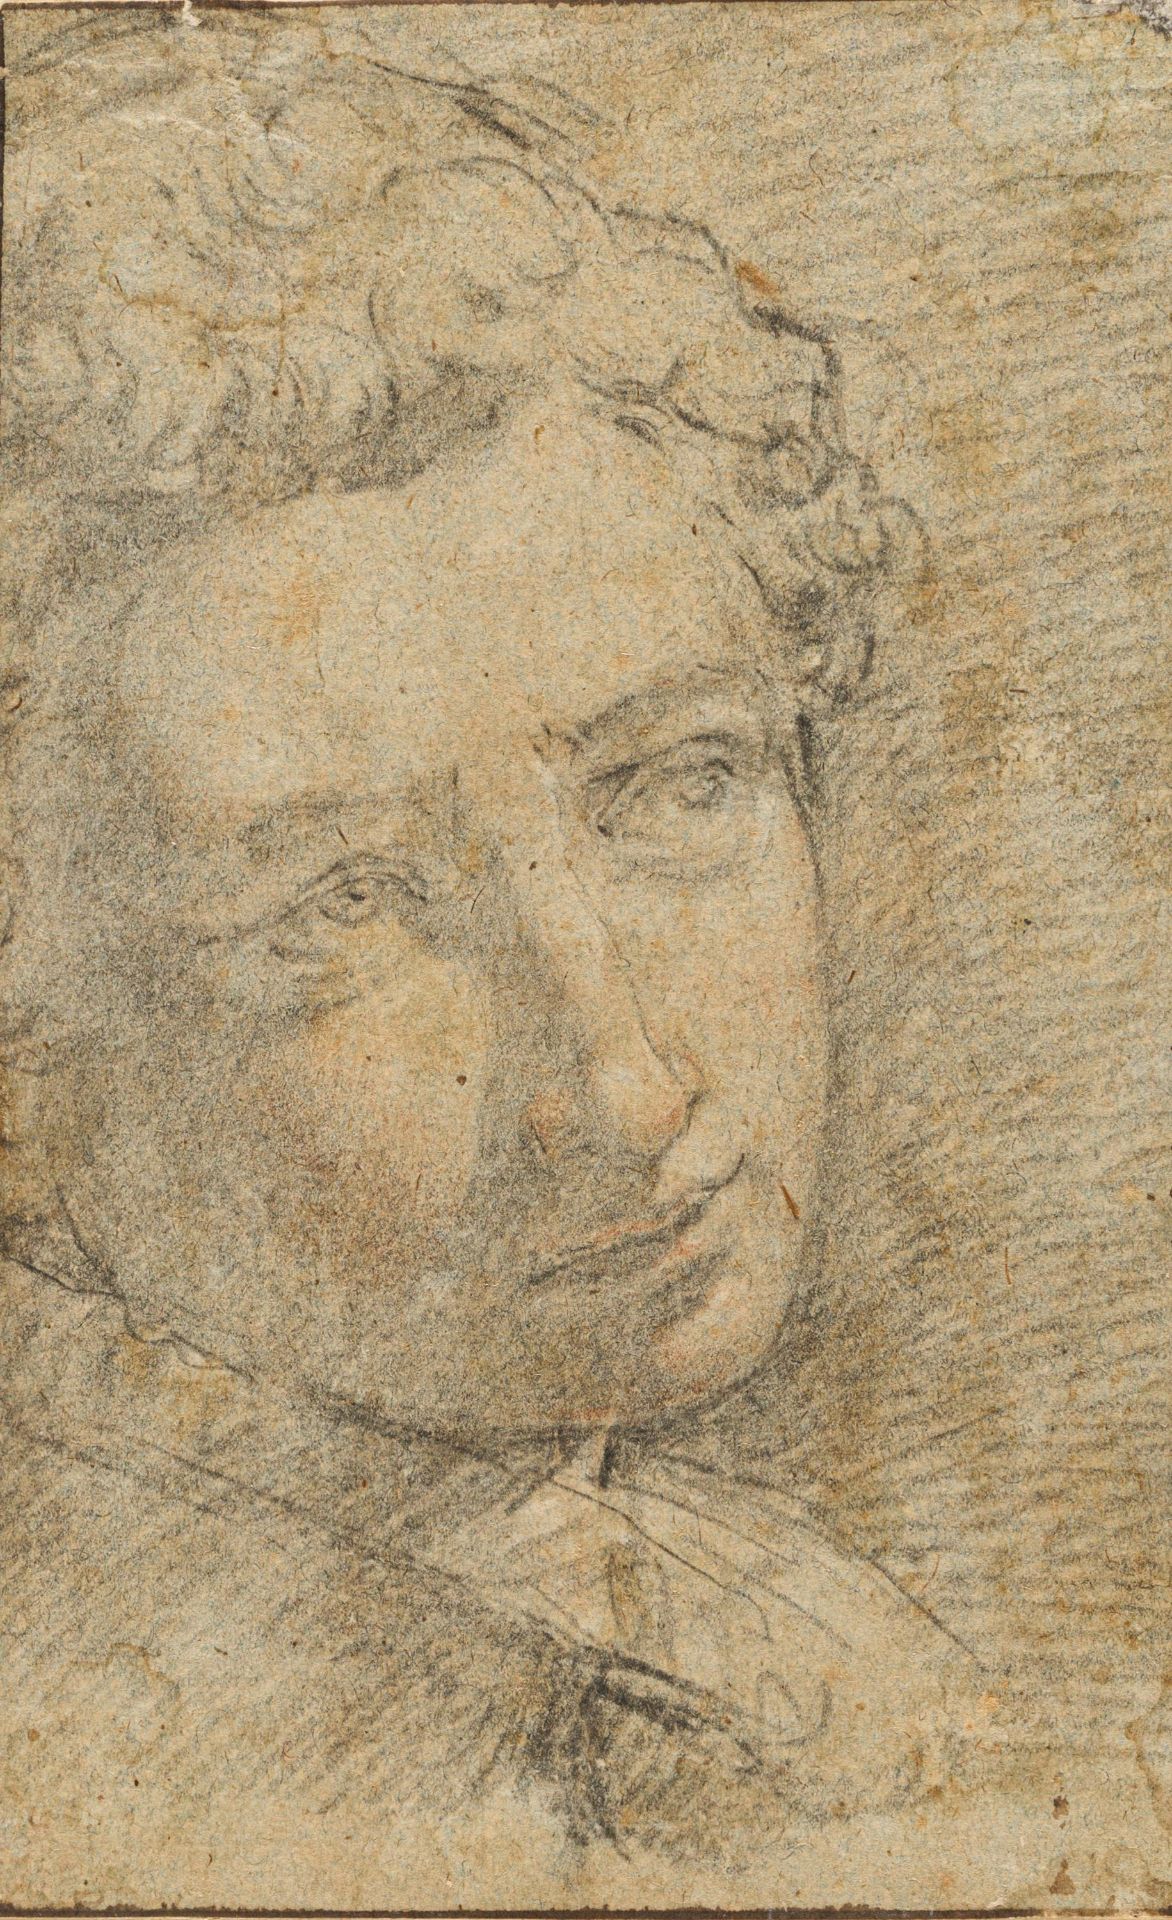 Florentine School: Study of a Young Man's Head Looking to the Right